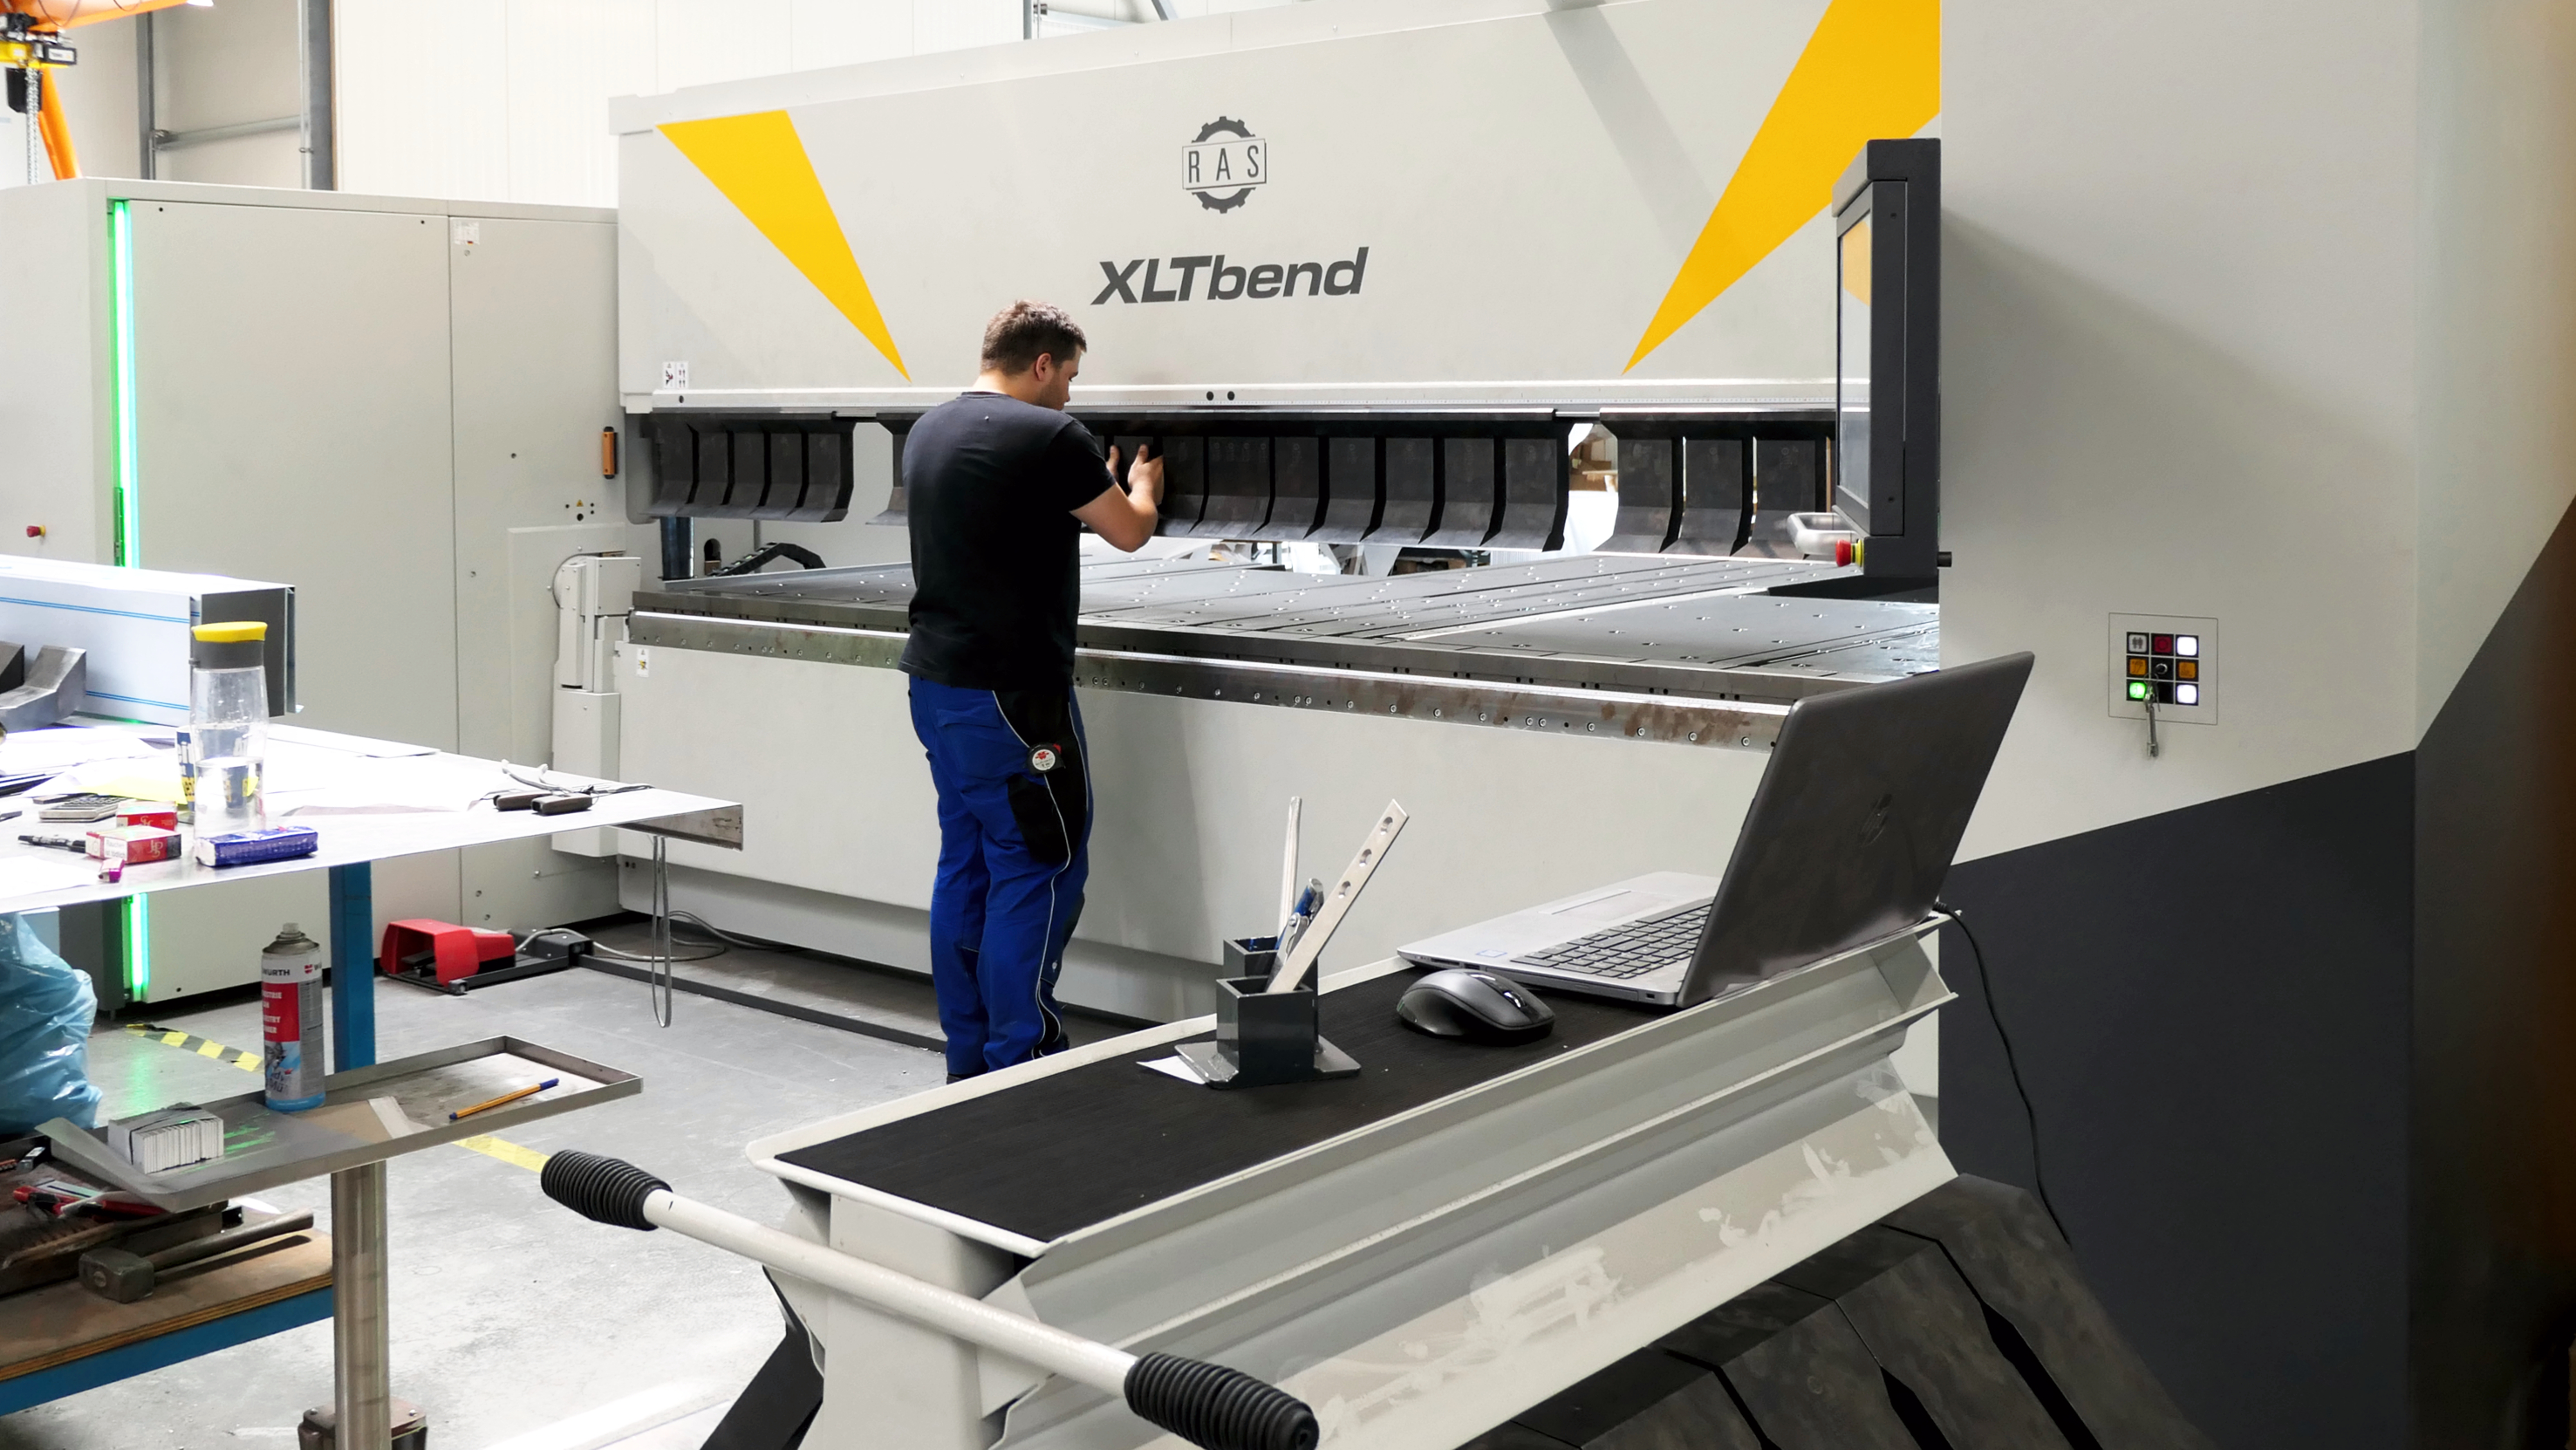 UpDown folding with the RAS XLTbend with up to 4060 mm bending length